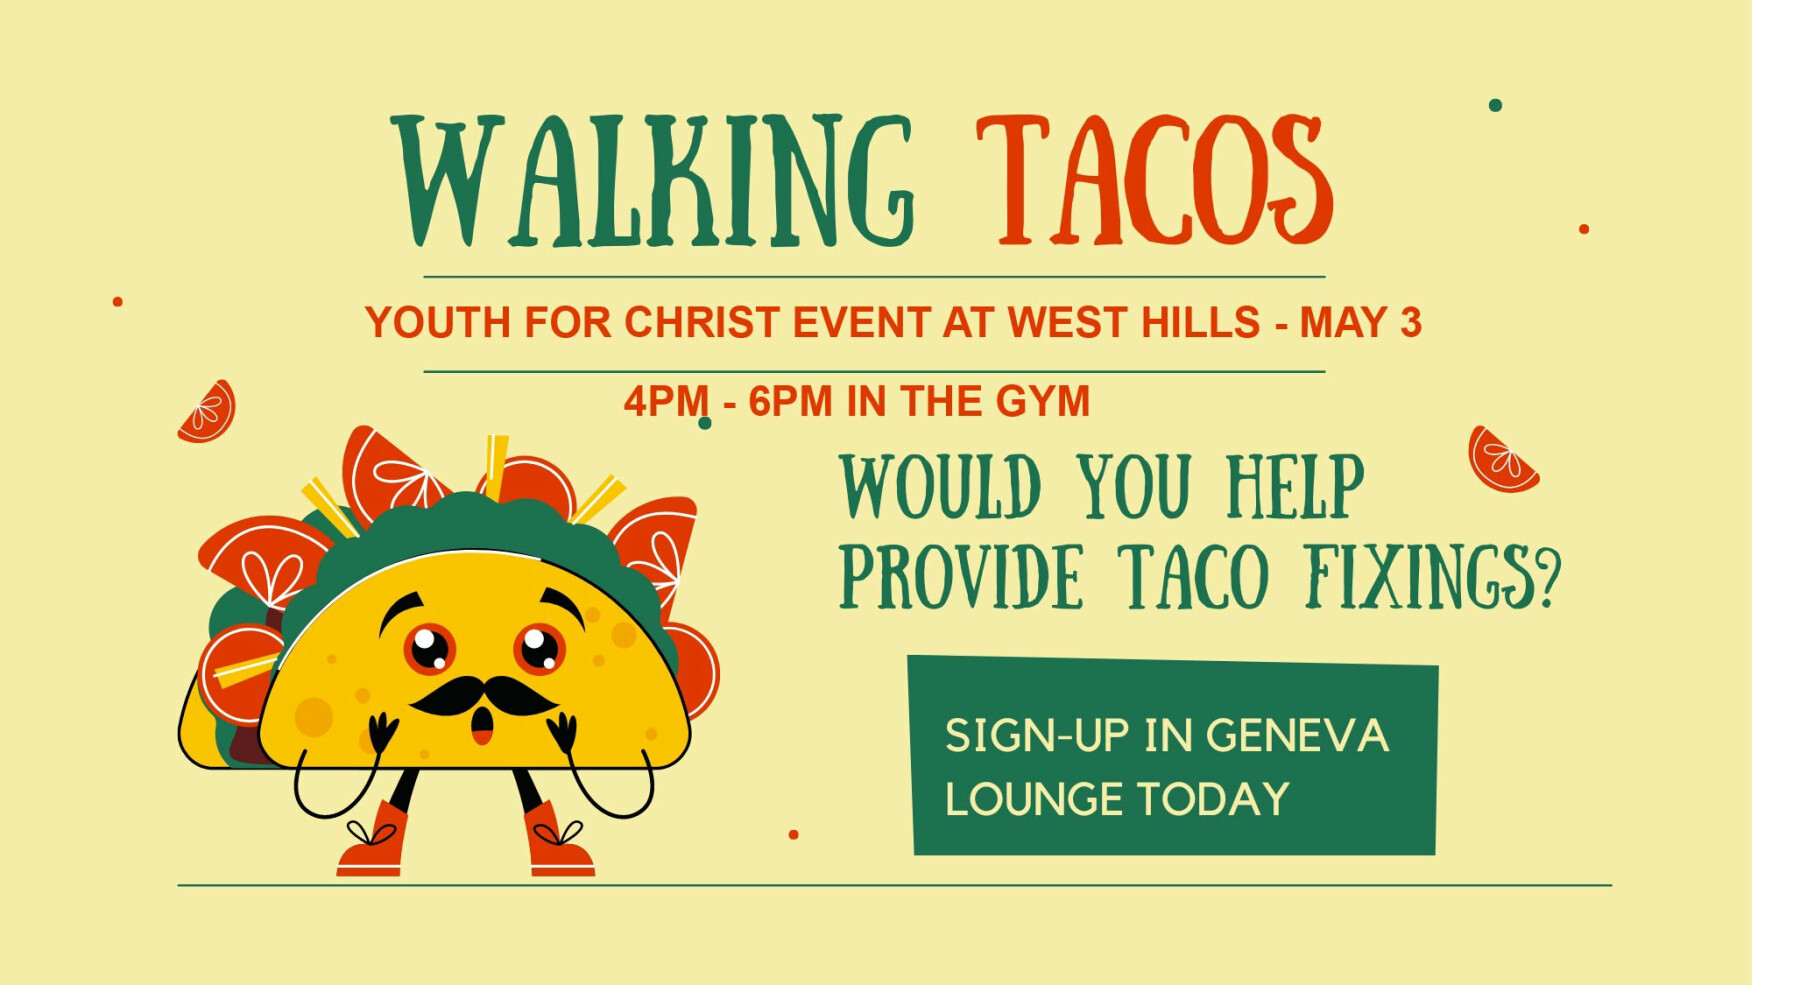 Walking Tacos - Youth For Christ Event